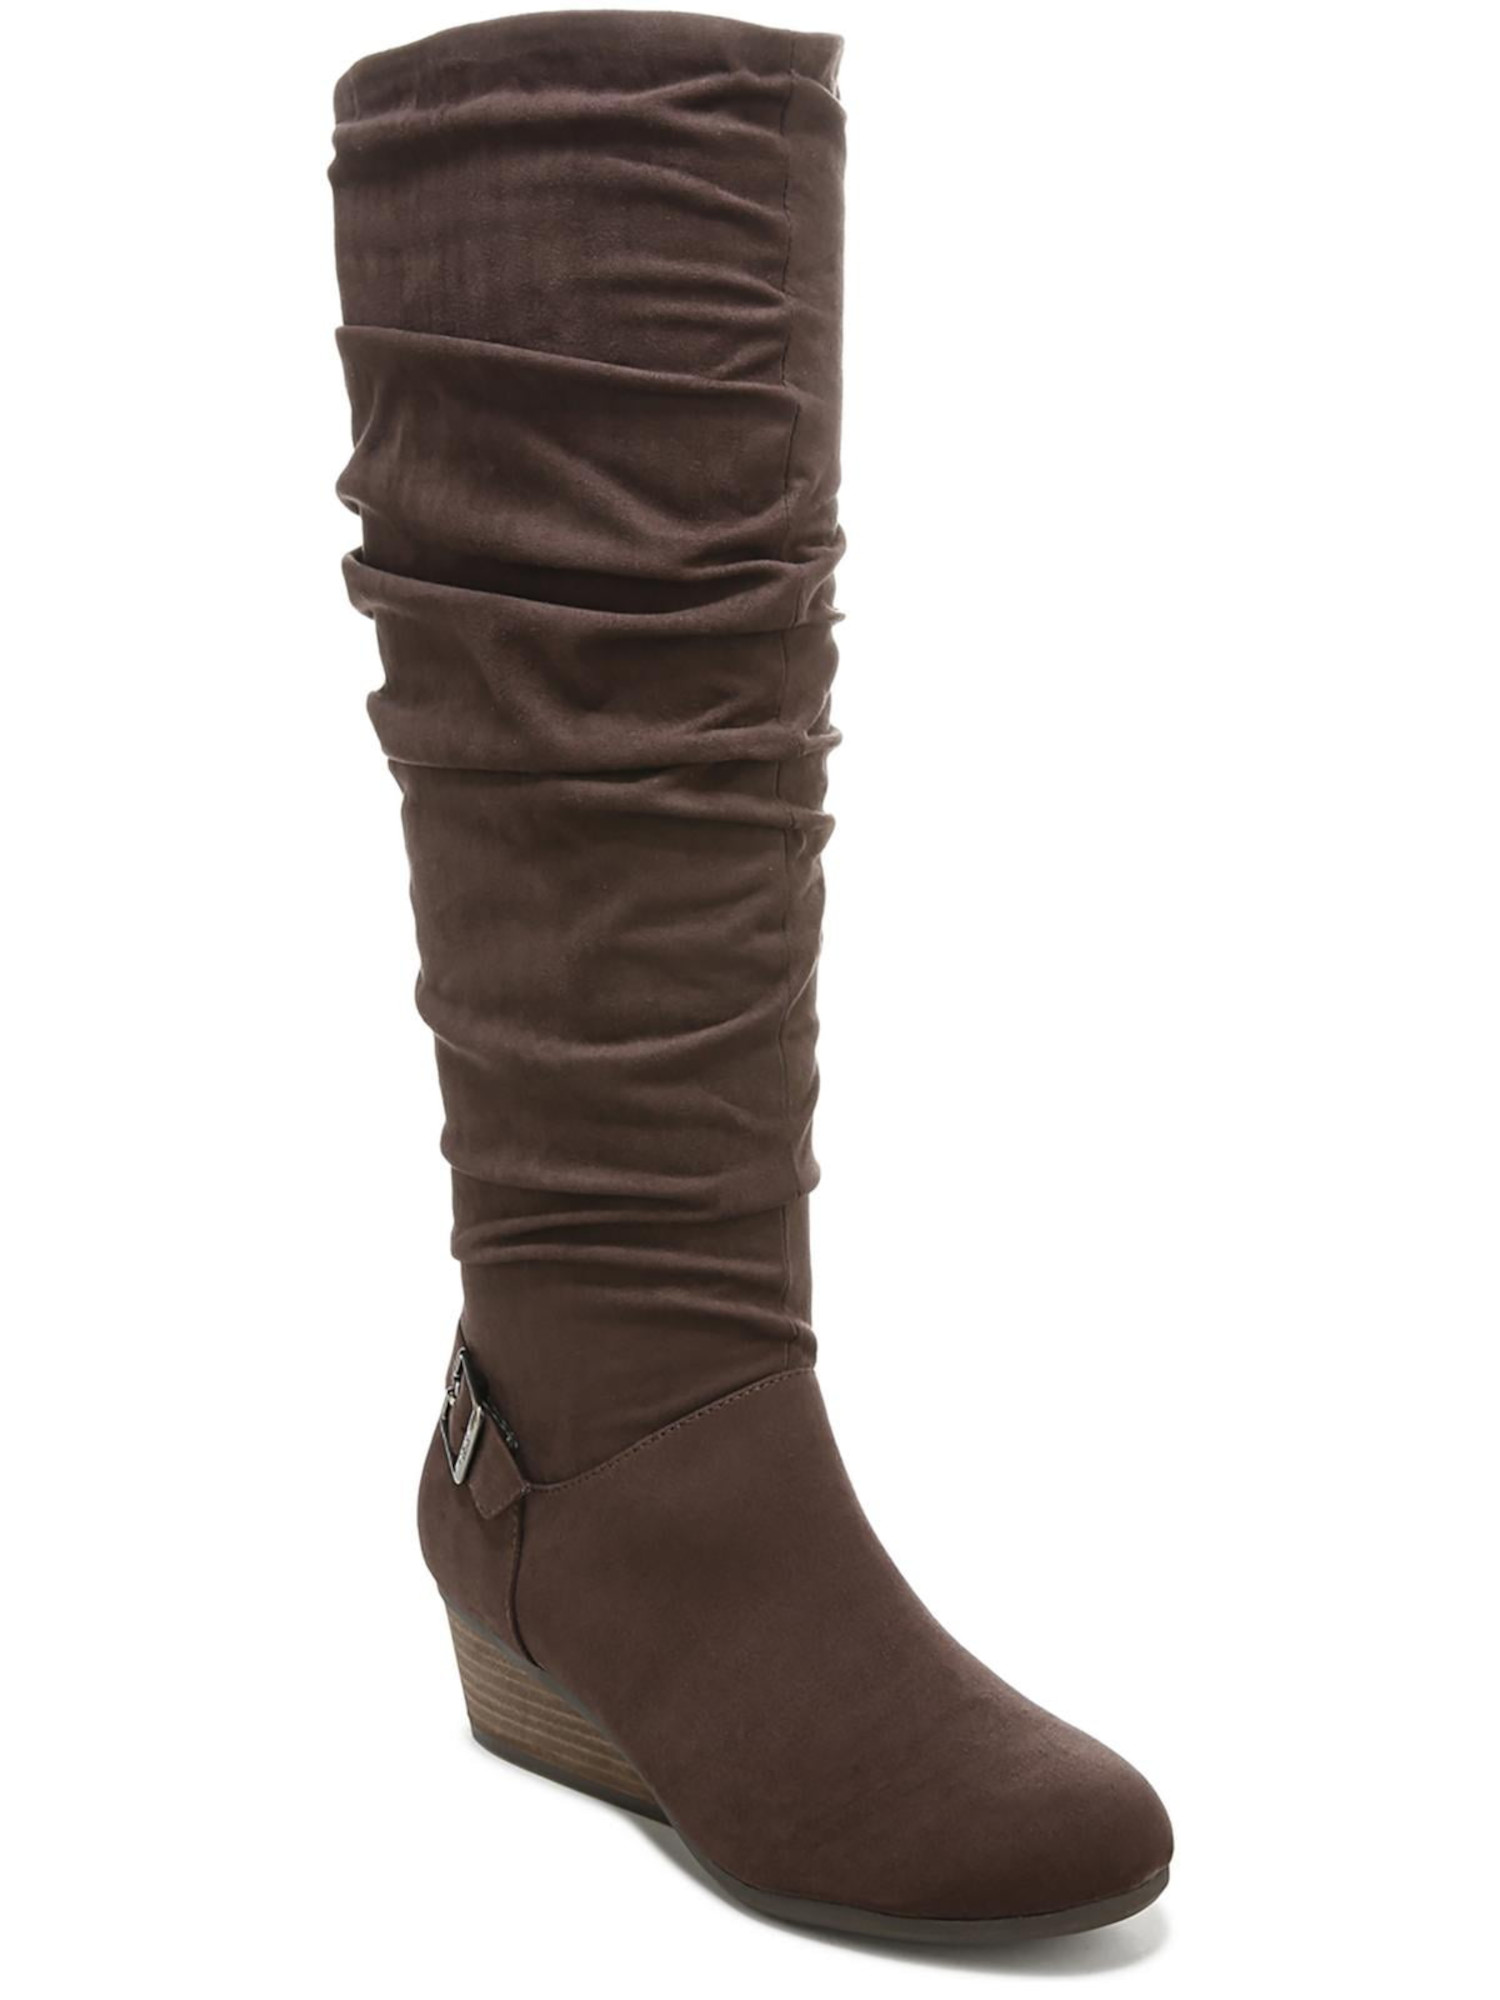 Dr. Scholl's DR SCHOLLS Womens Brown Goring Padded Buckle Accent Ruched Break Free Round Toe Wedge Zip-Up Slouch Boot 7 M